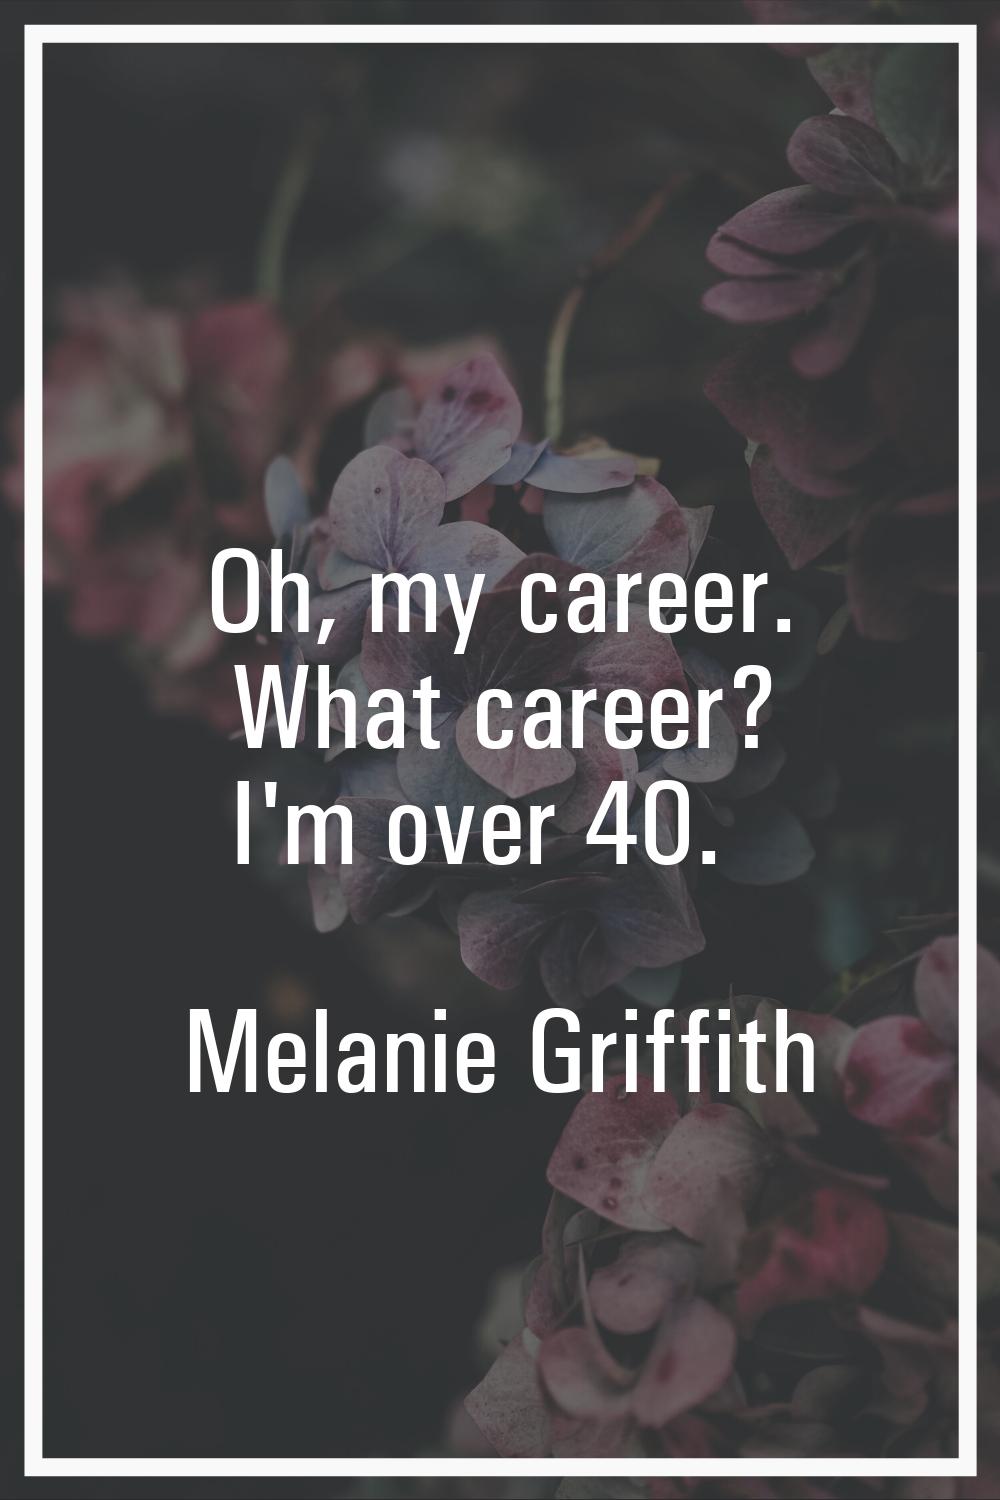 Oh, my career. What career? I'm over 40.